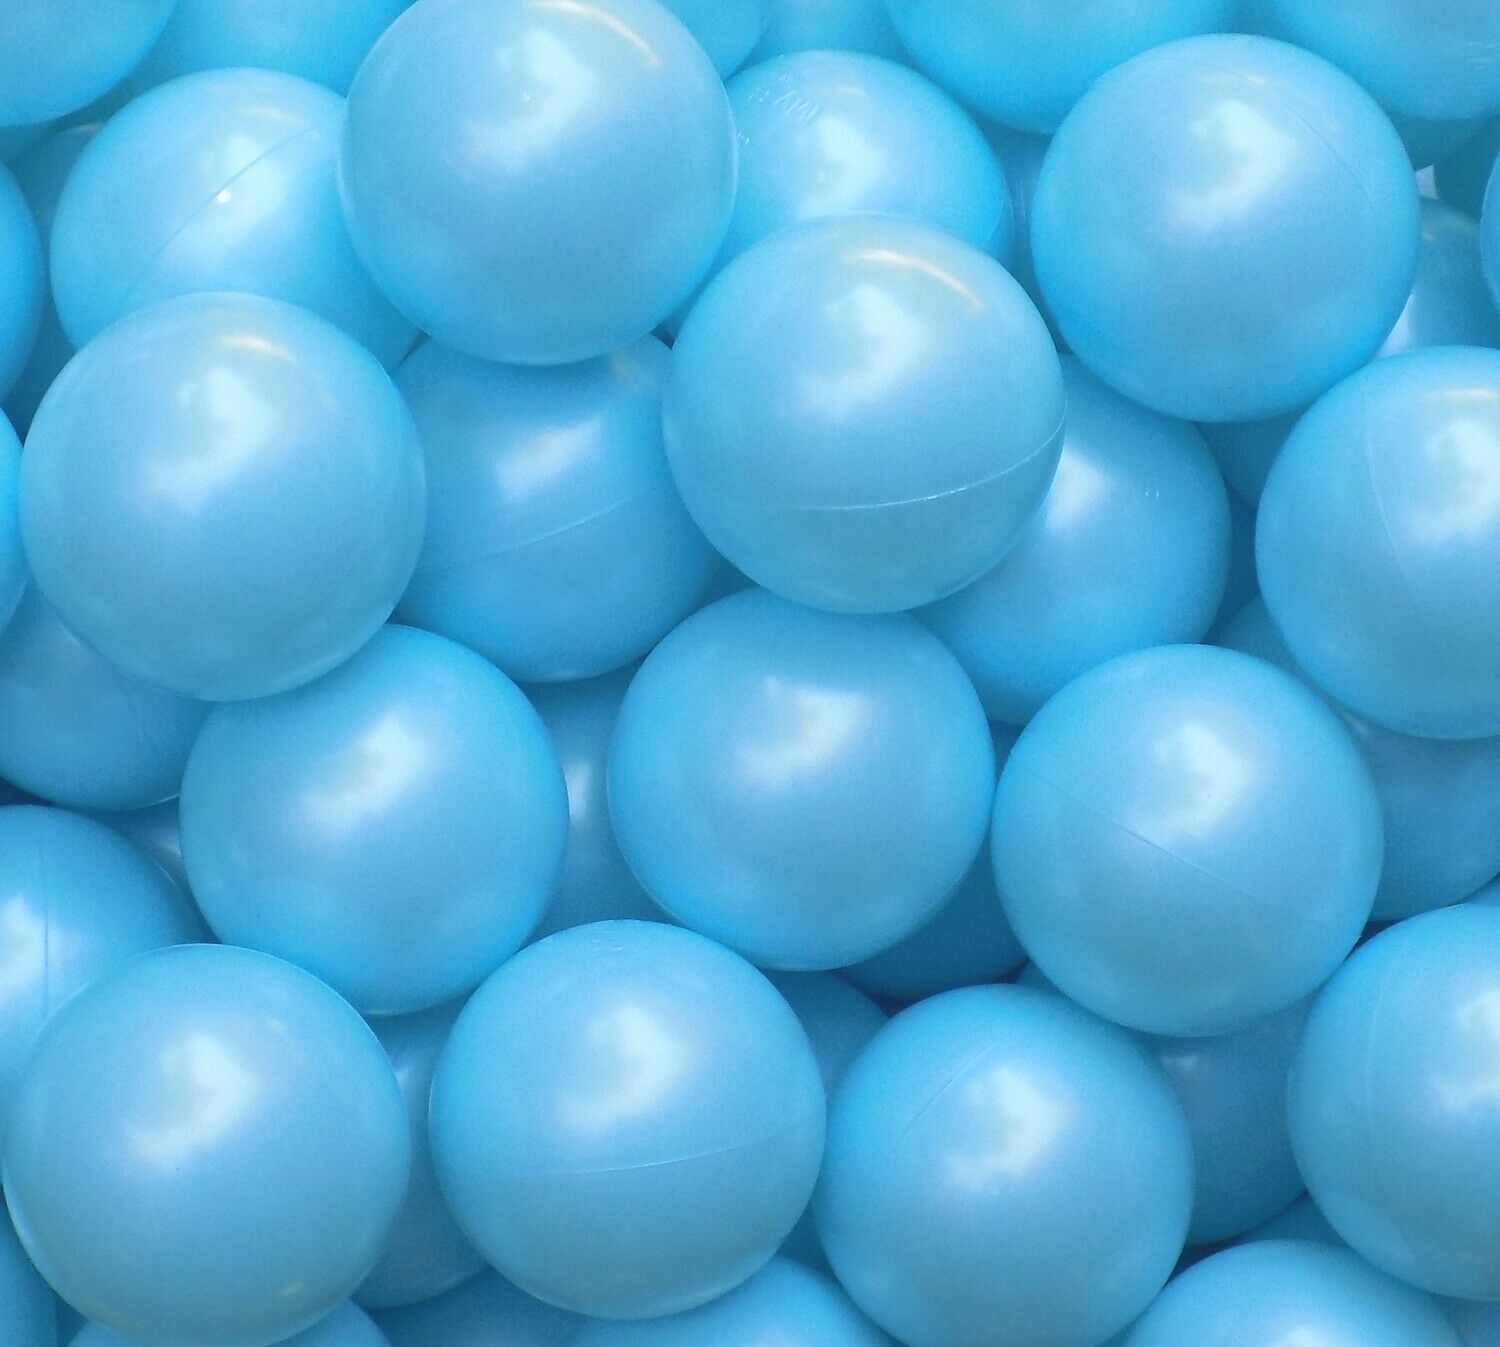 100 Jumbo 3" Macaron-blue (baby-blue) Color Hd Commercial Grade Ball Pit Balls